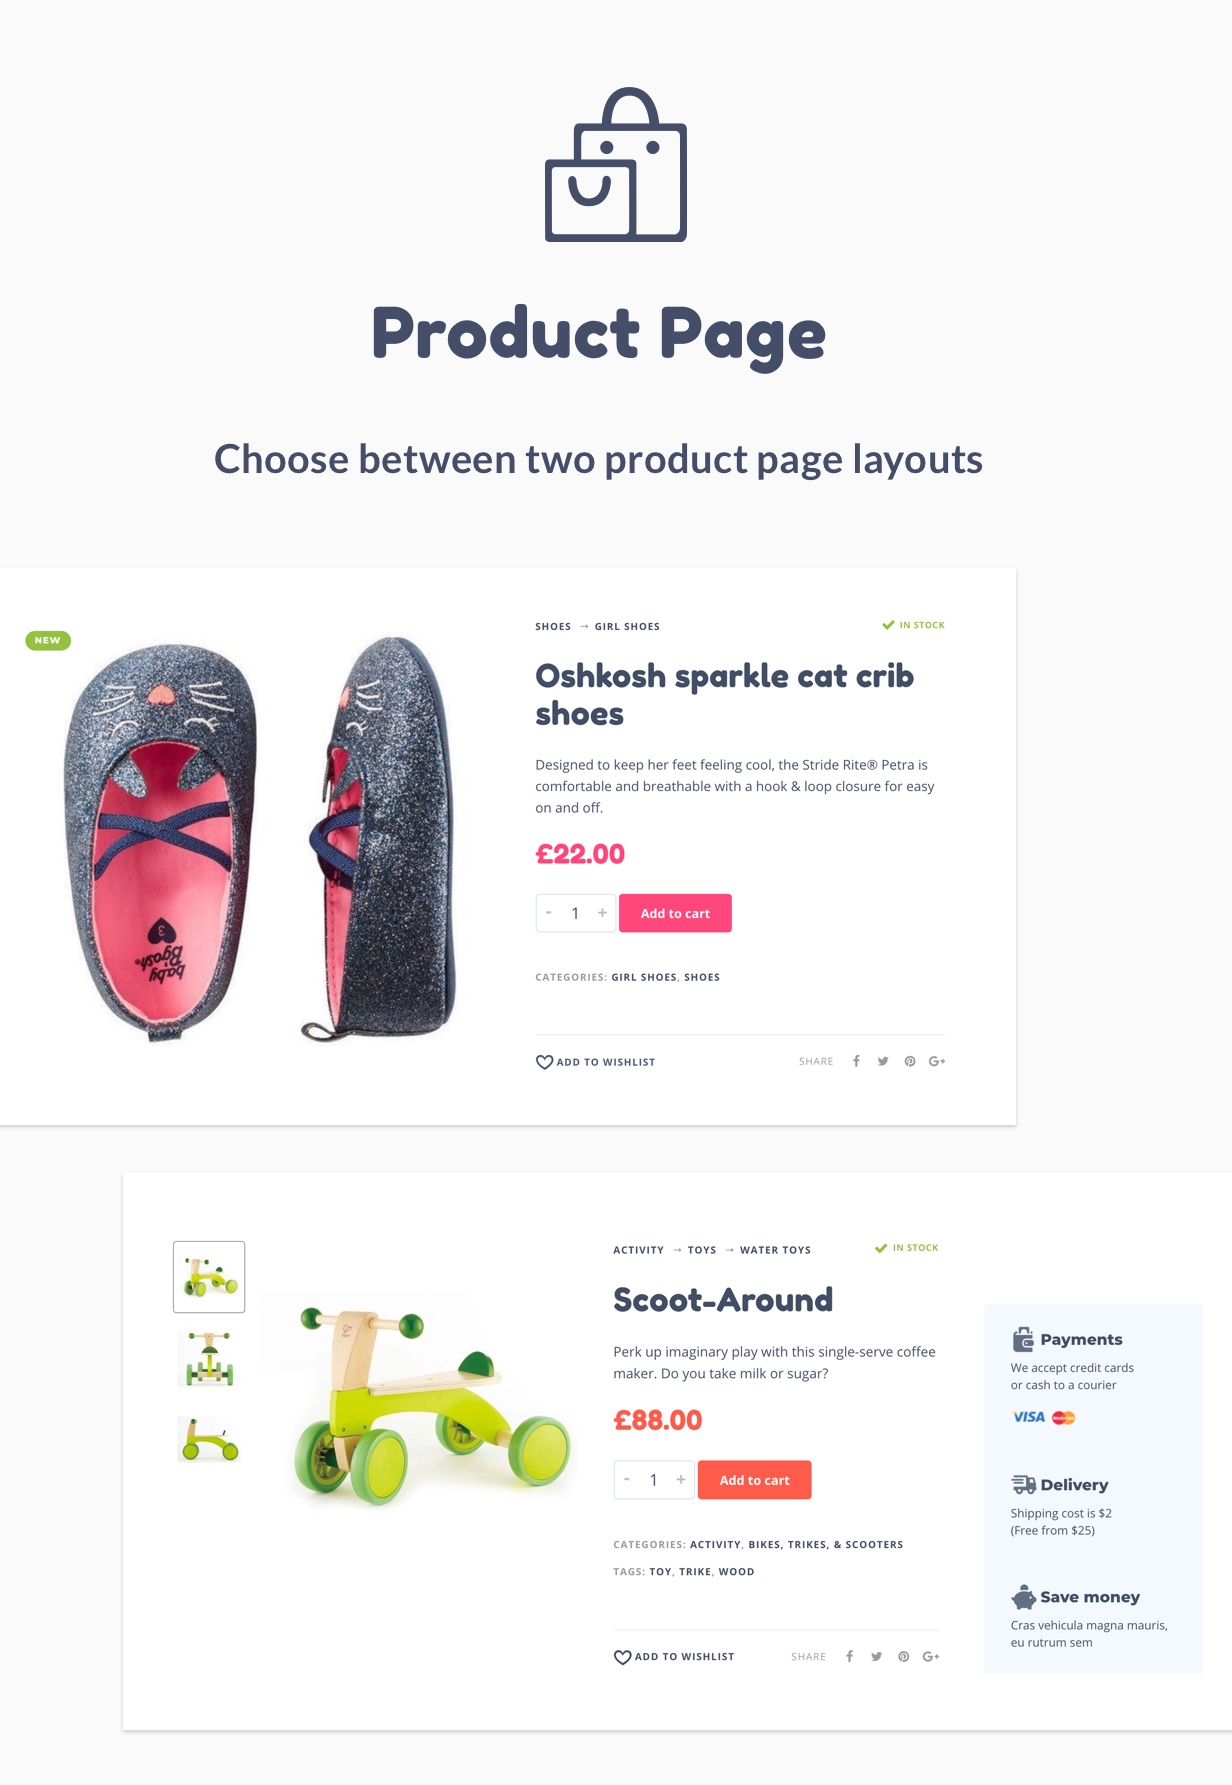 Two product page layouts